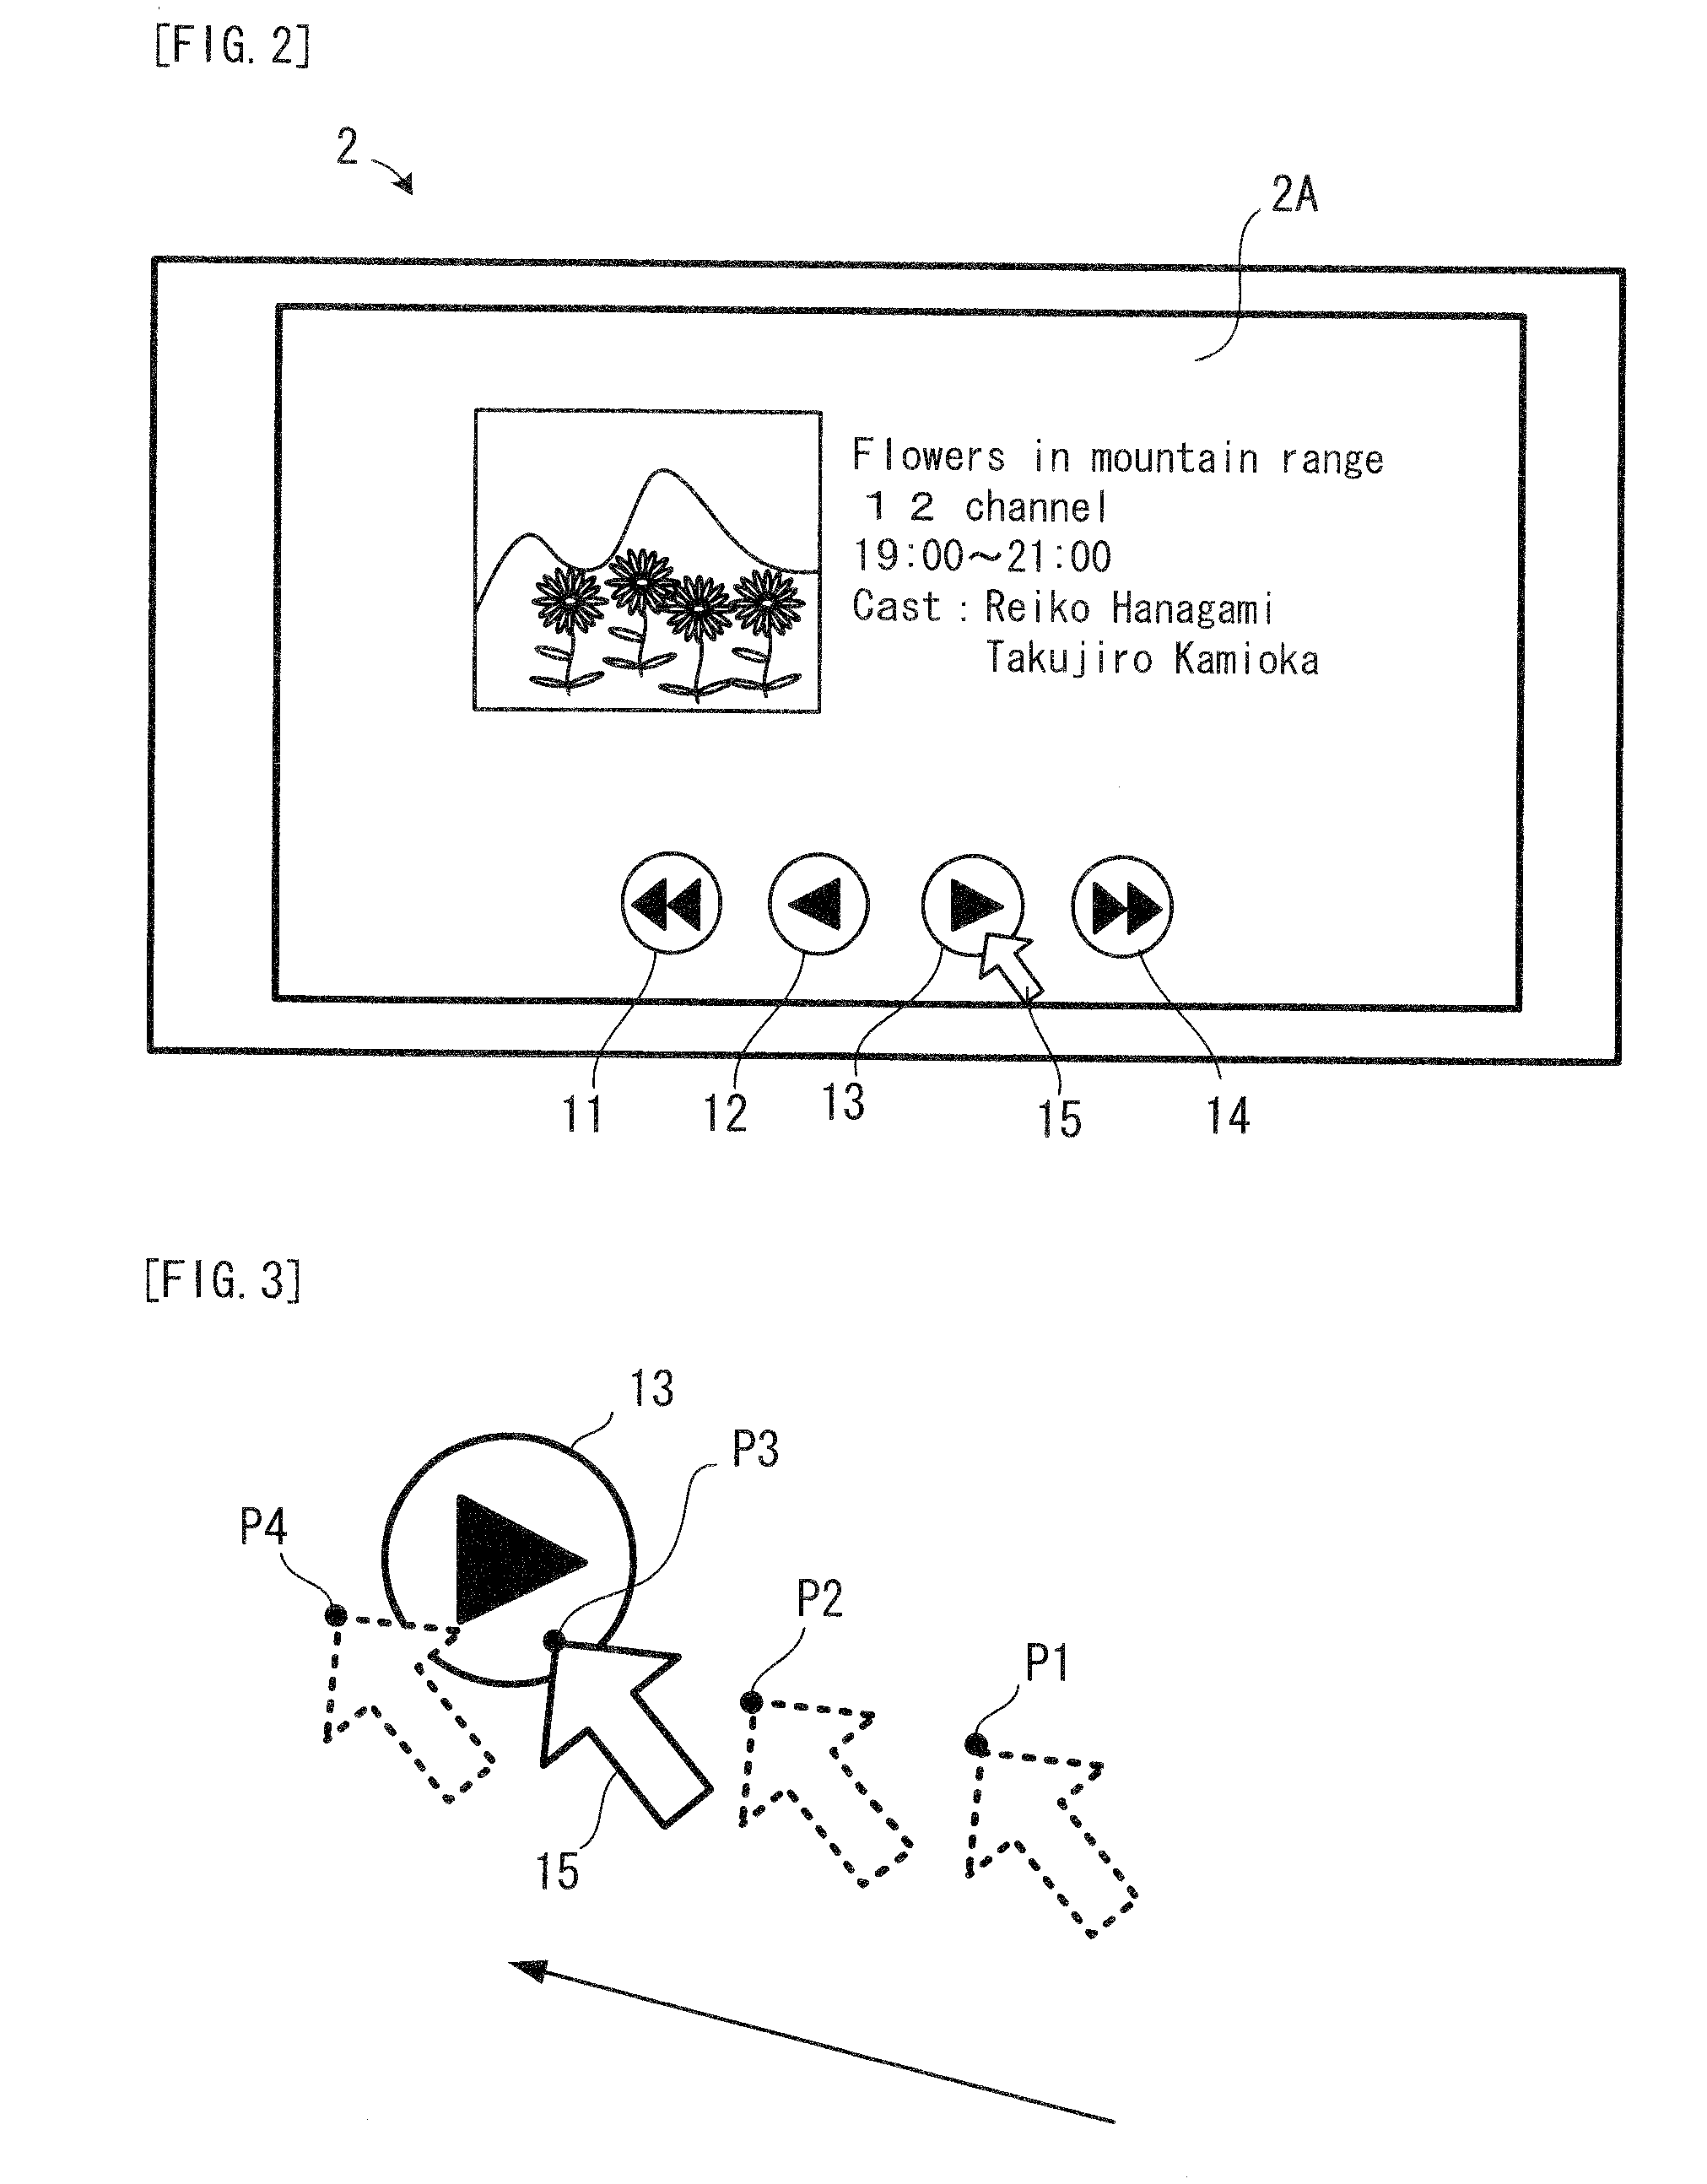 Input controller used together with pointing device and input control method